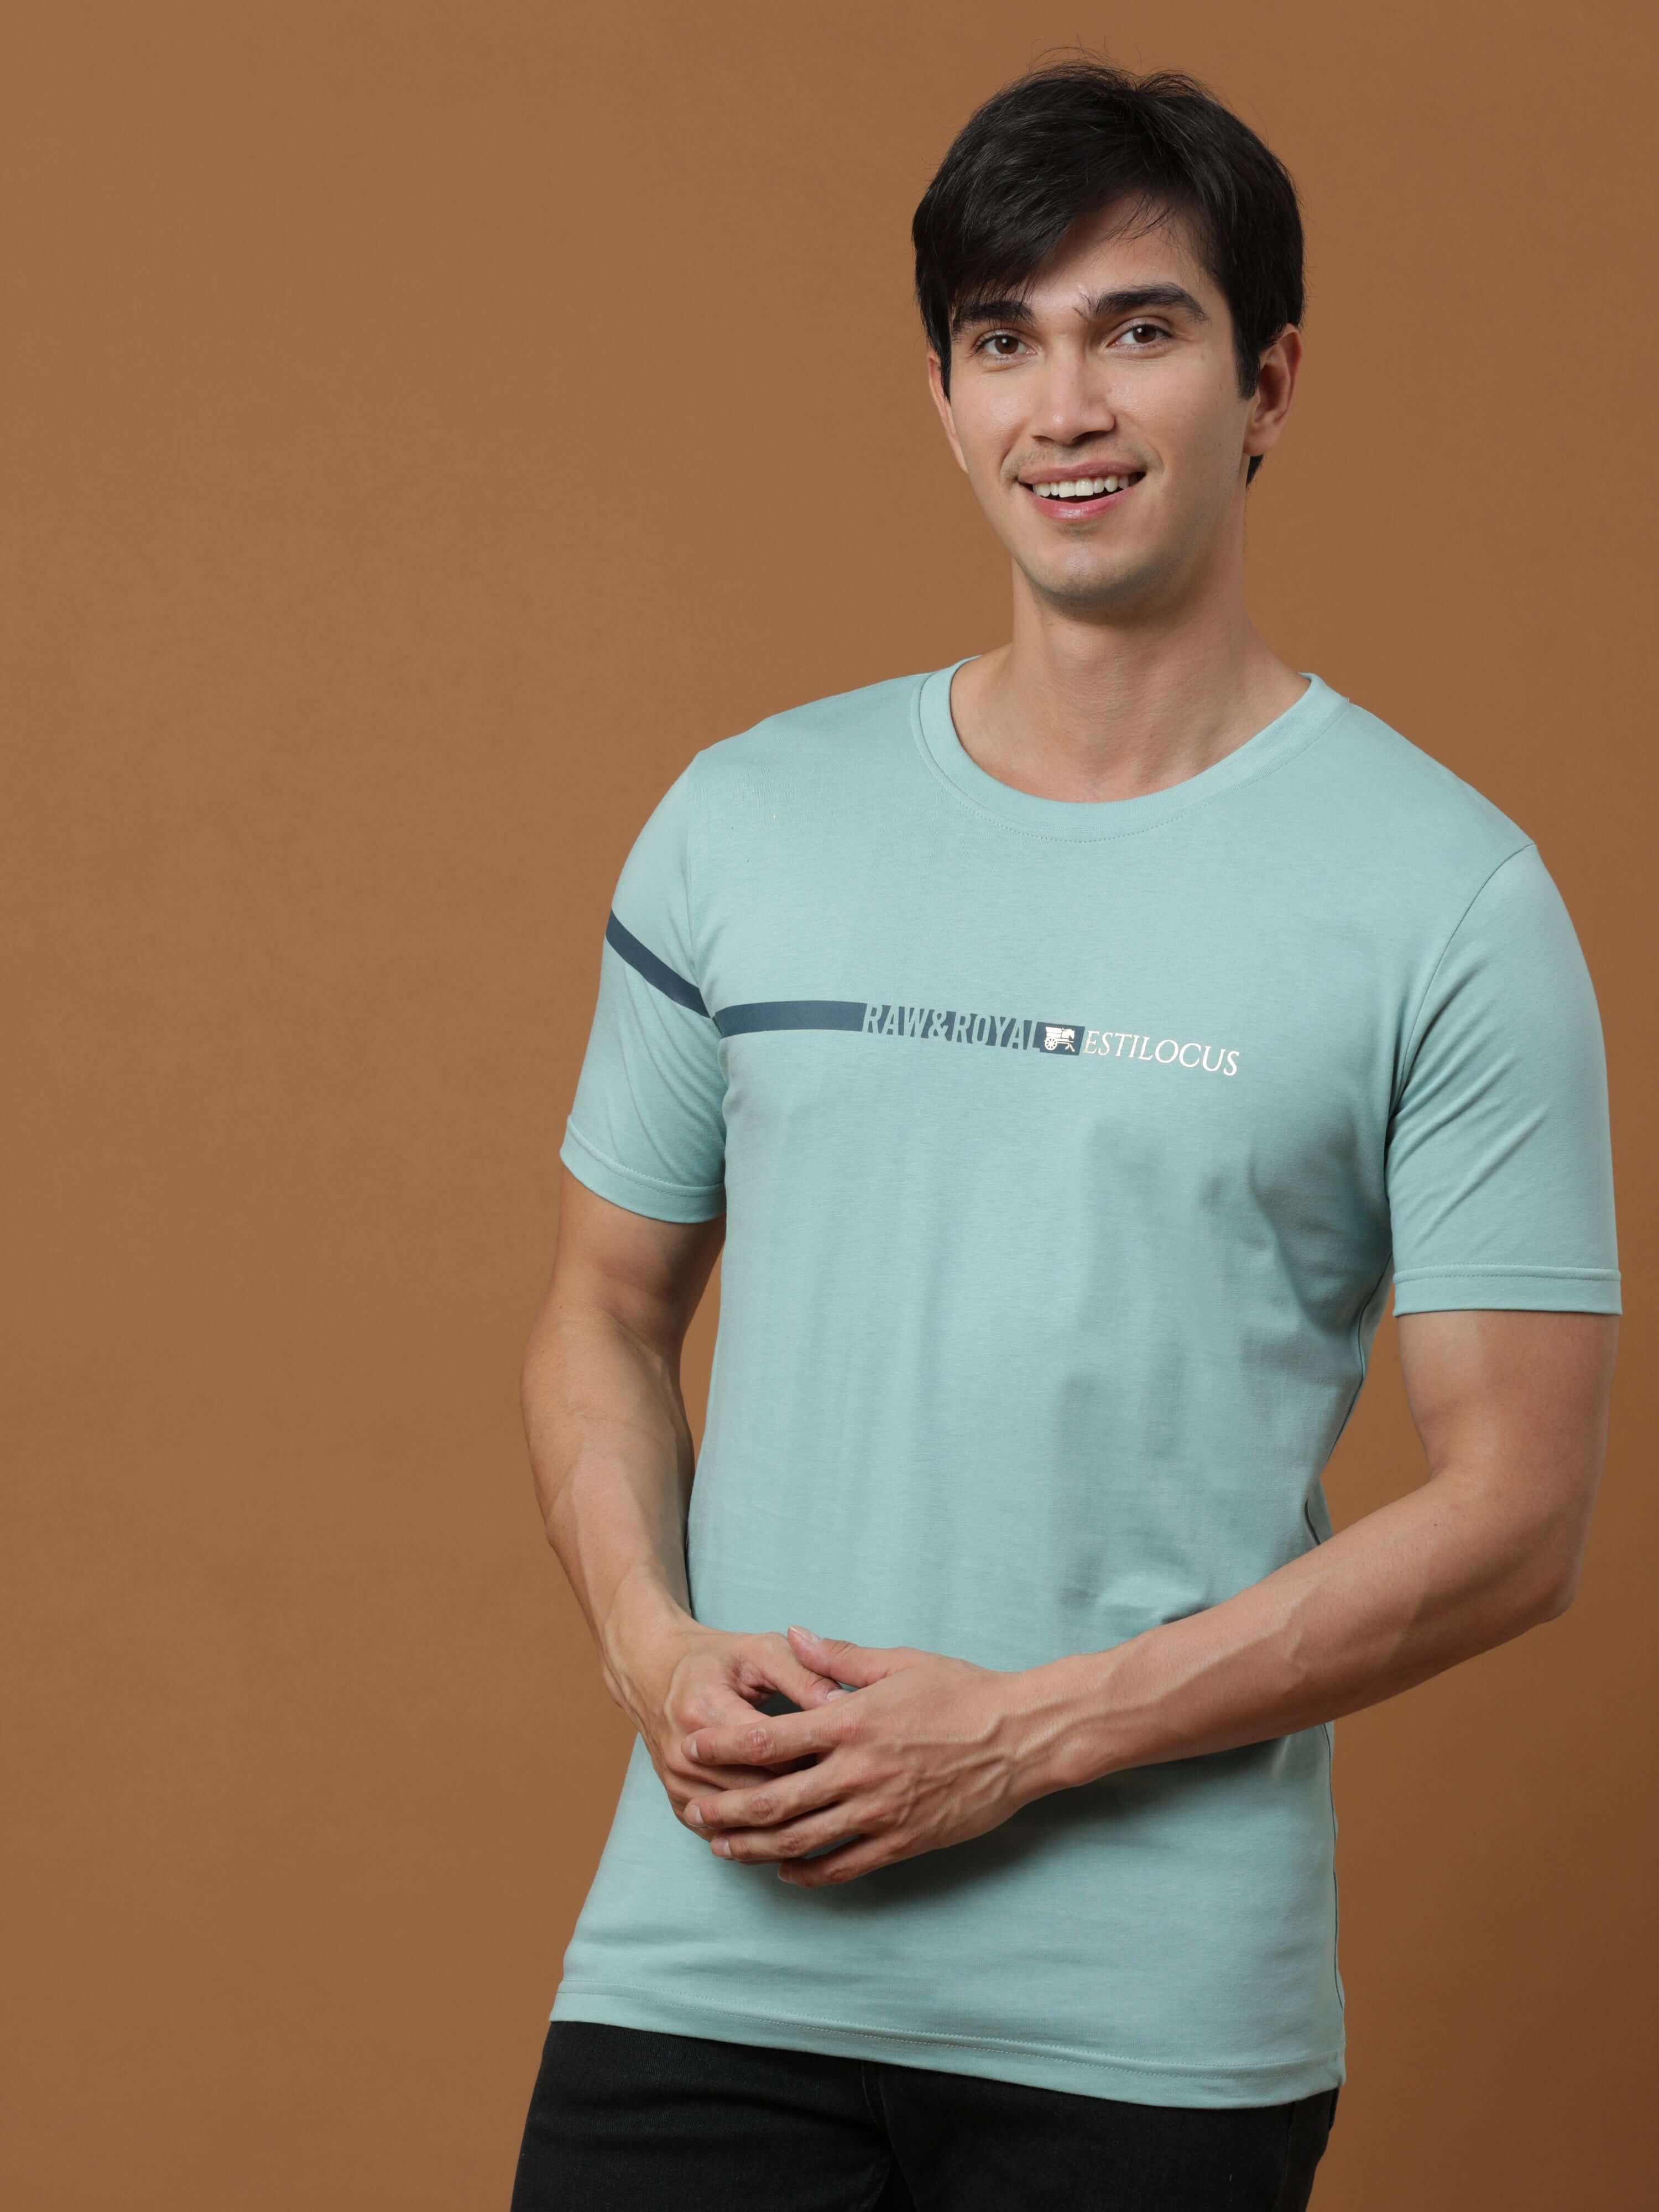 Raw&Royal Aqua Printed T Shirt shop online at Estilocus. 100% Cotton Designed and printed on knitted fabric. The fabric is stretchy and lightweight, with a soft skin feel and no wrinkles. Crew neck collar which is smooth on the neck and keeps you comforta